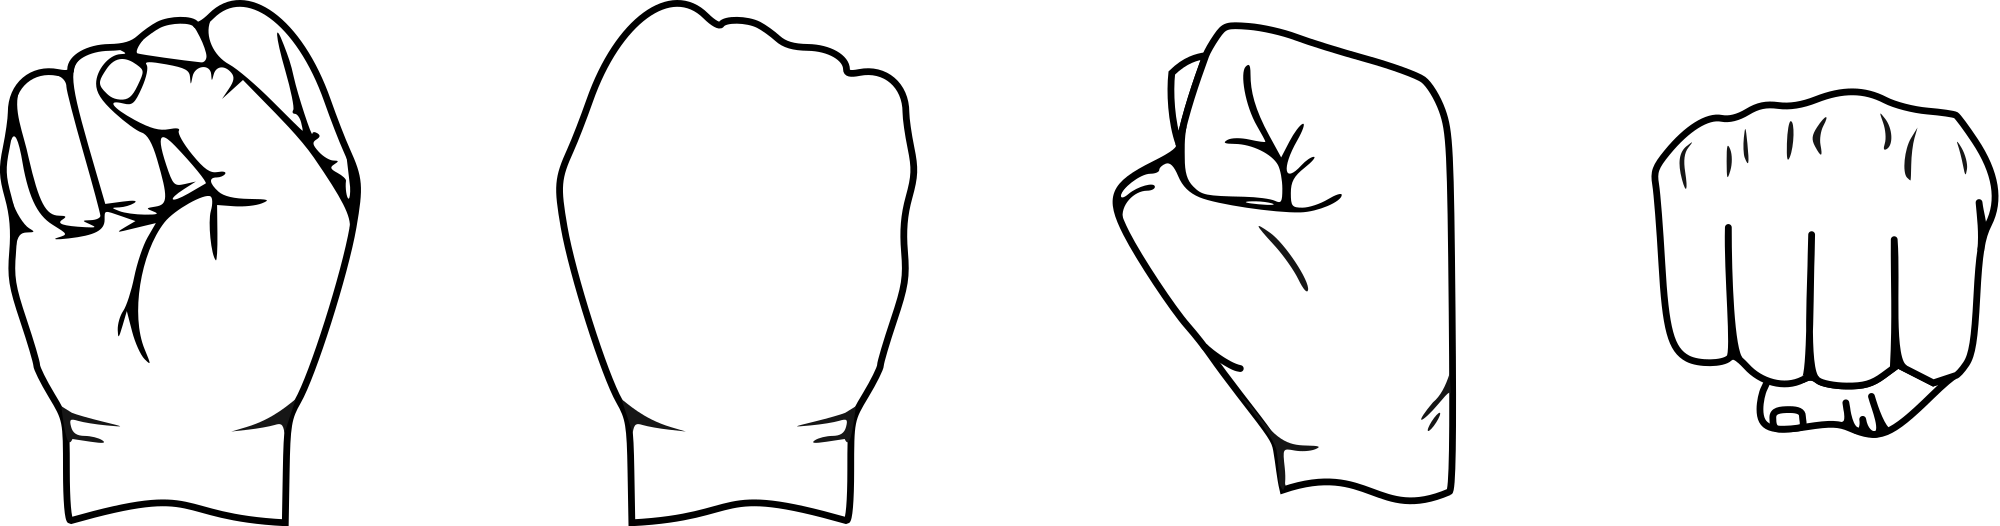 Human_fist_different_sides.svg.png